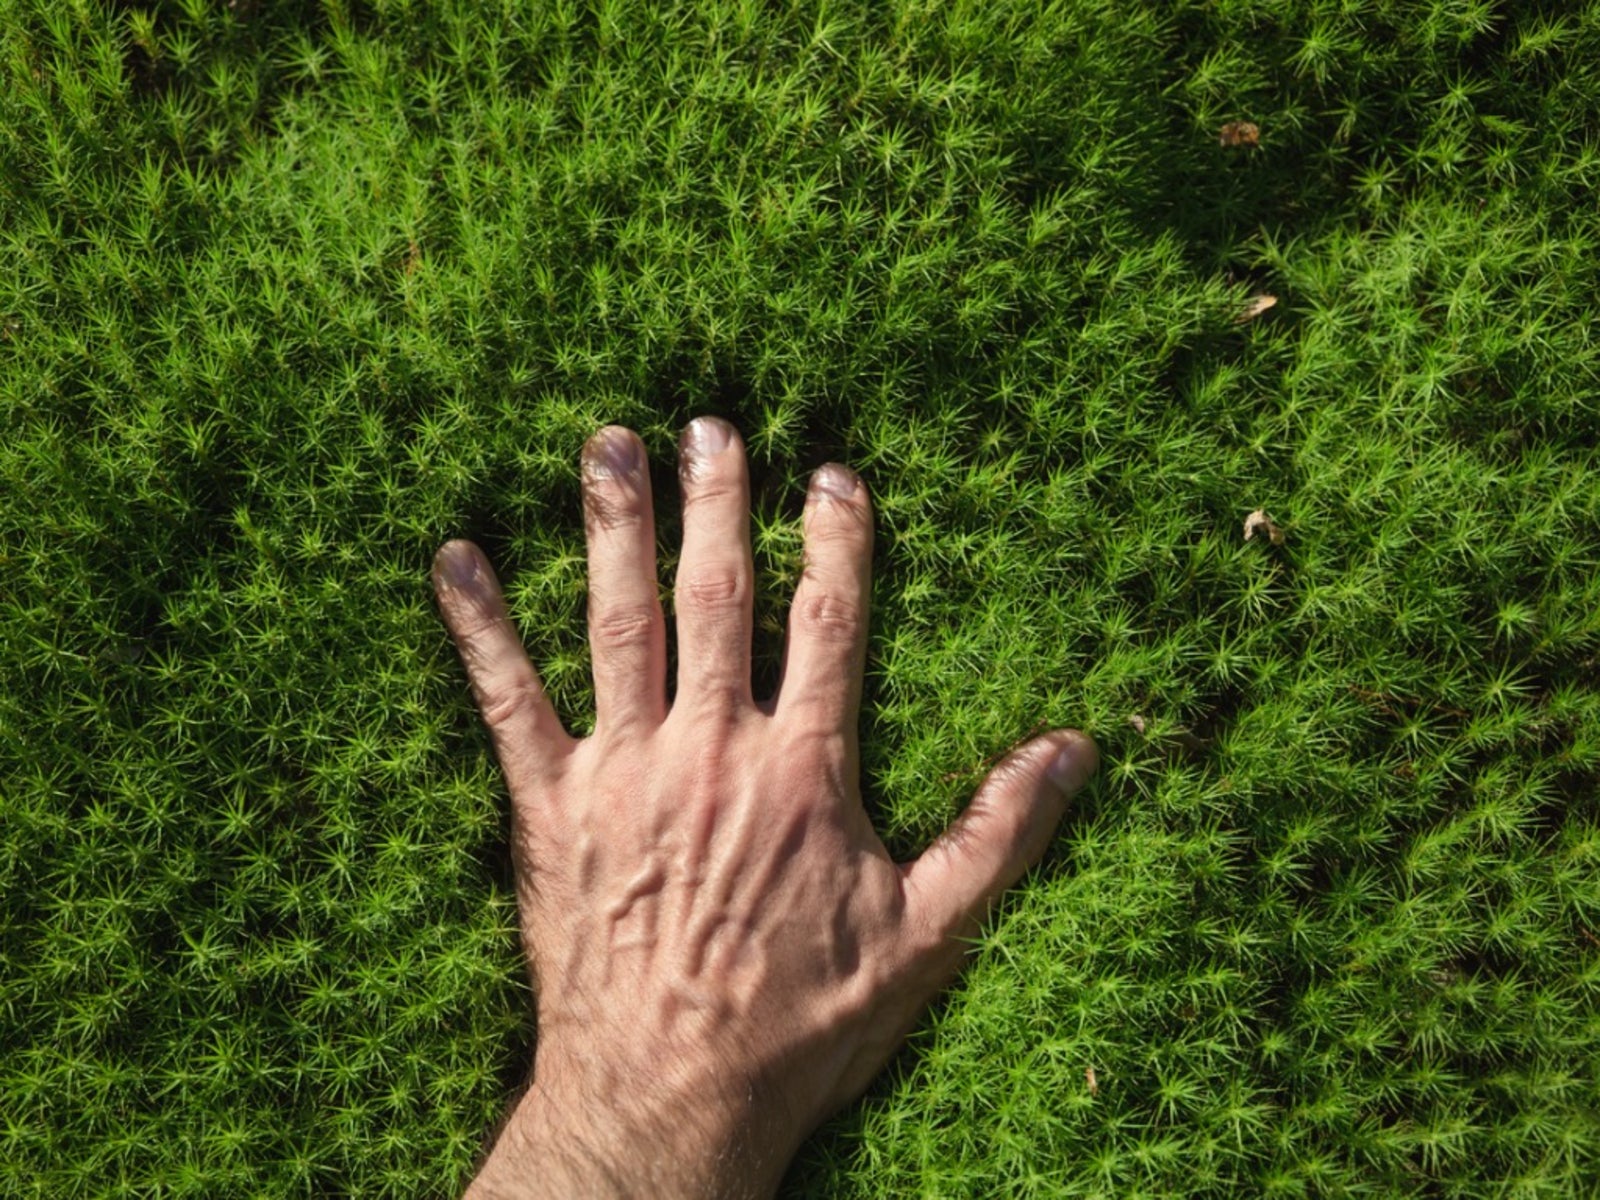 How to Take Care of Moss